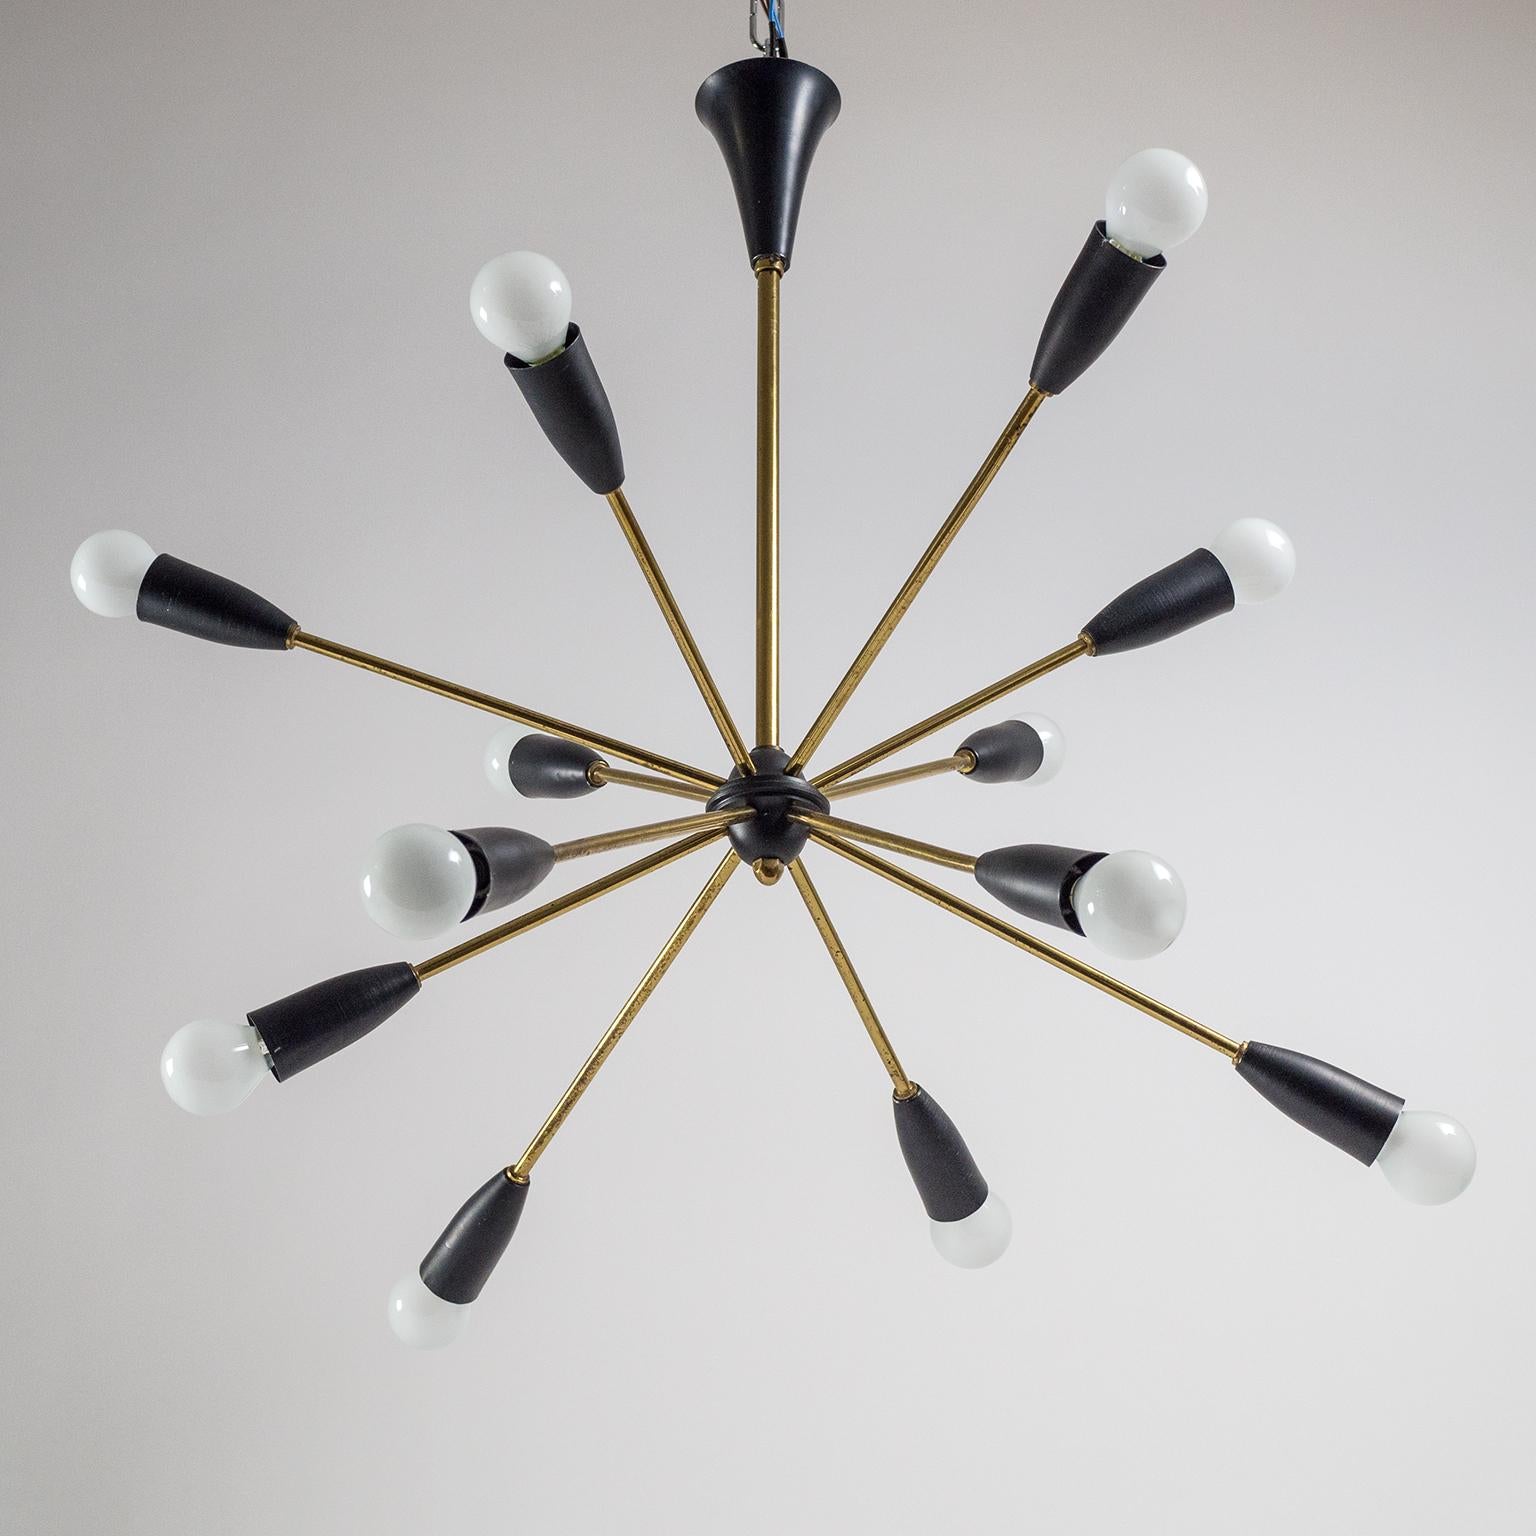 Rare French Sputnik chandelier from the 1950s. Twelve brass arms in two different lengths give this chandelier an wonderful mid century asymetric 'star burst' touch, changing its appearance depending on the viewing angle. Lovely original condition